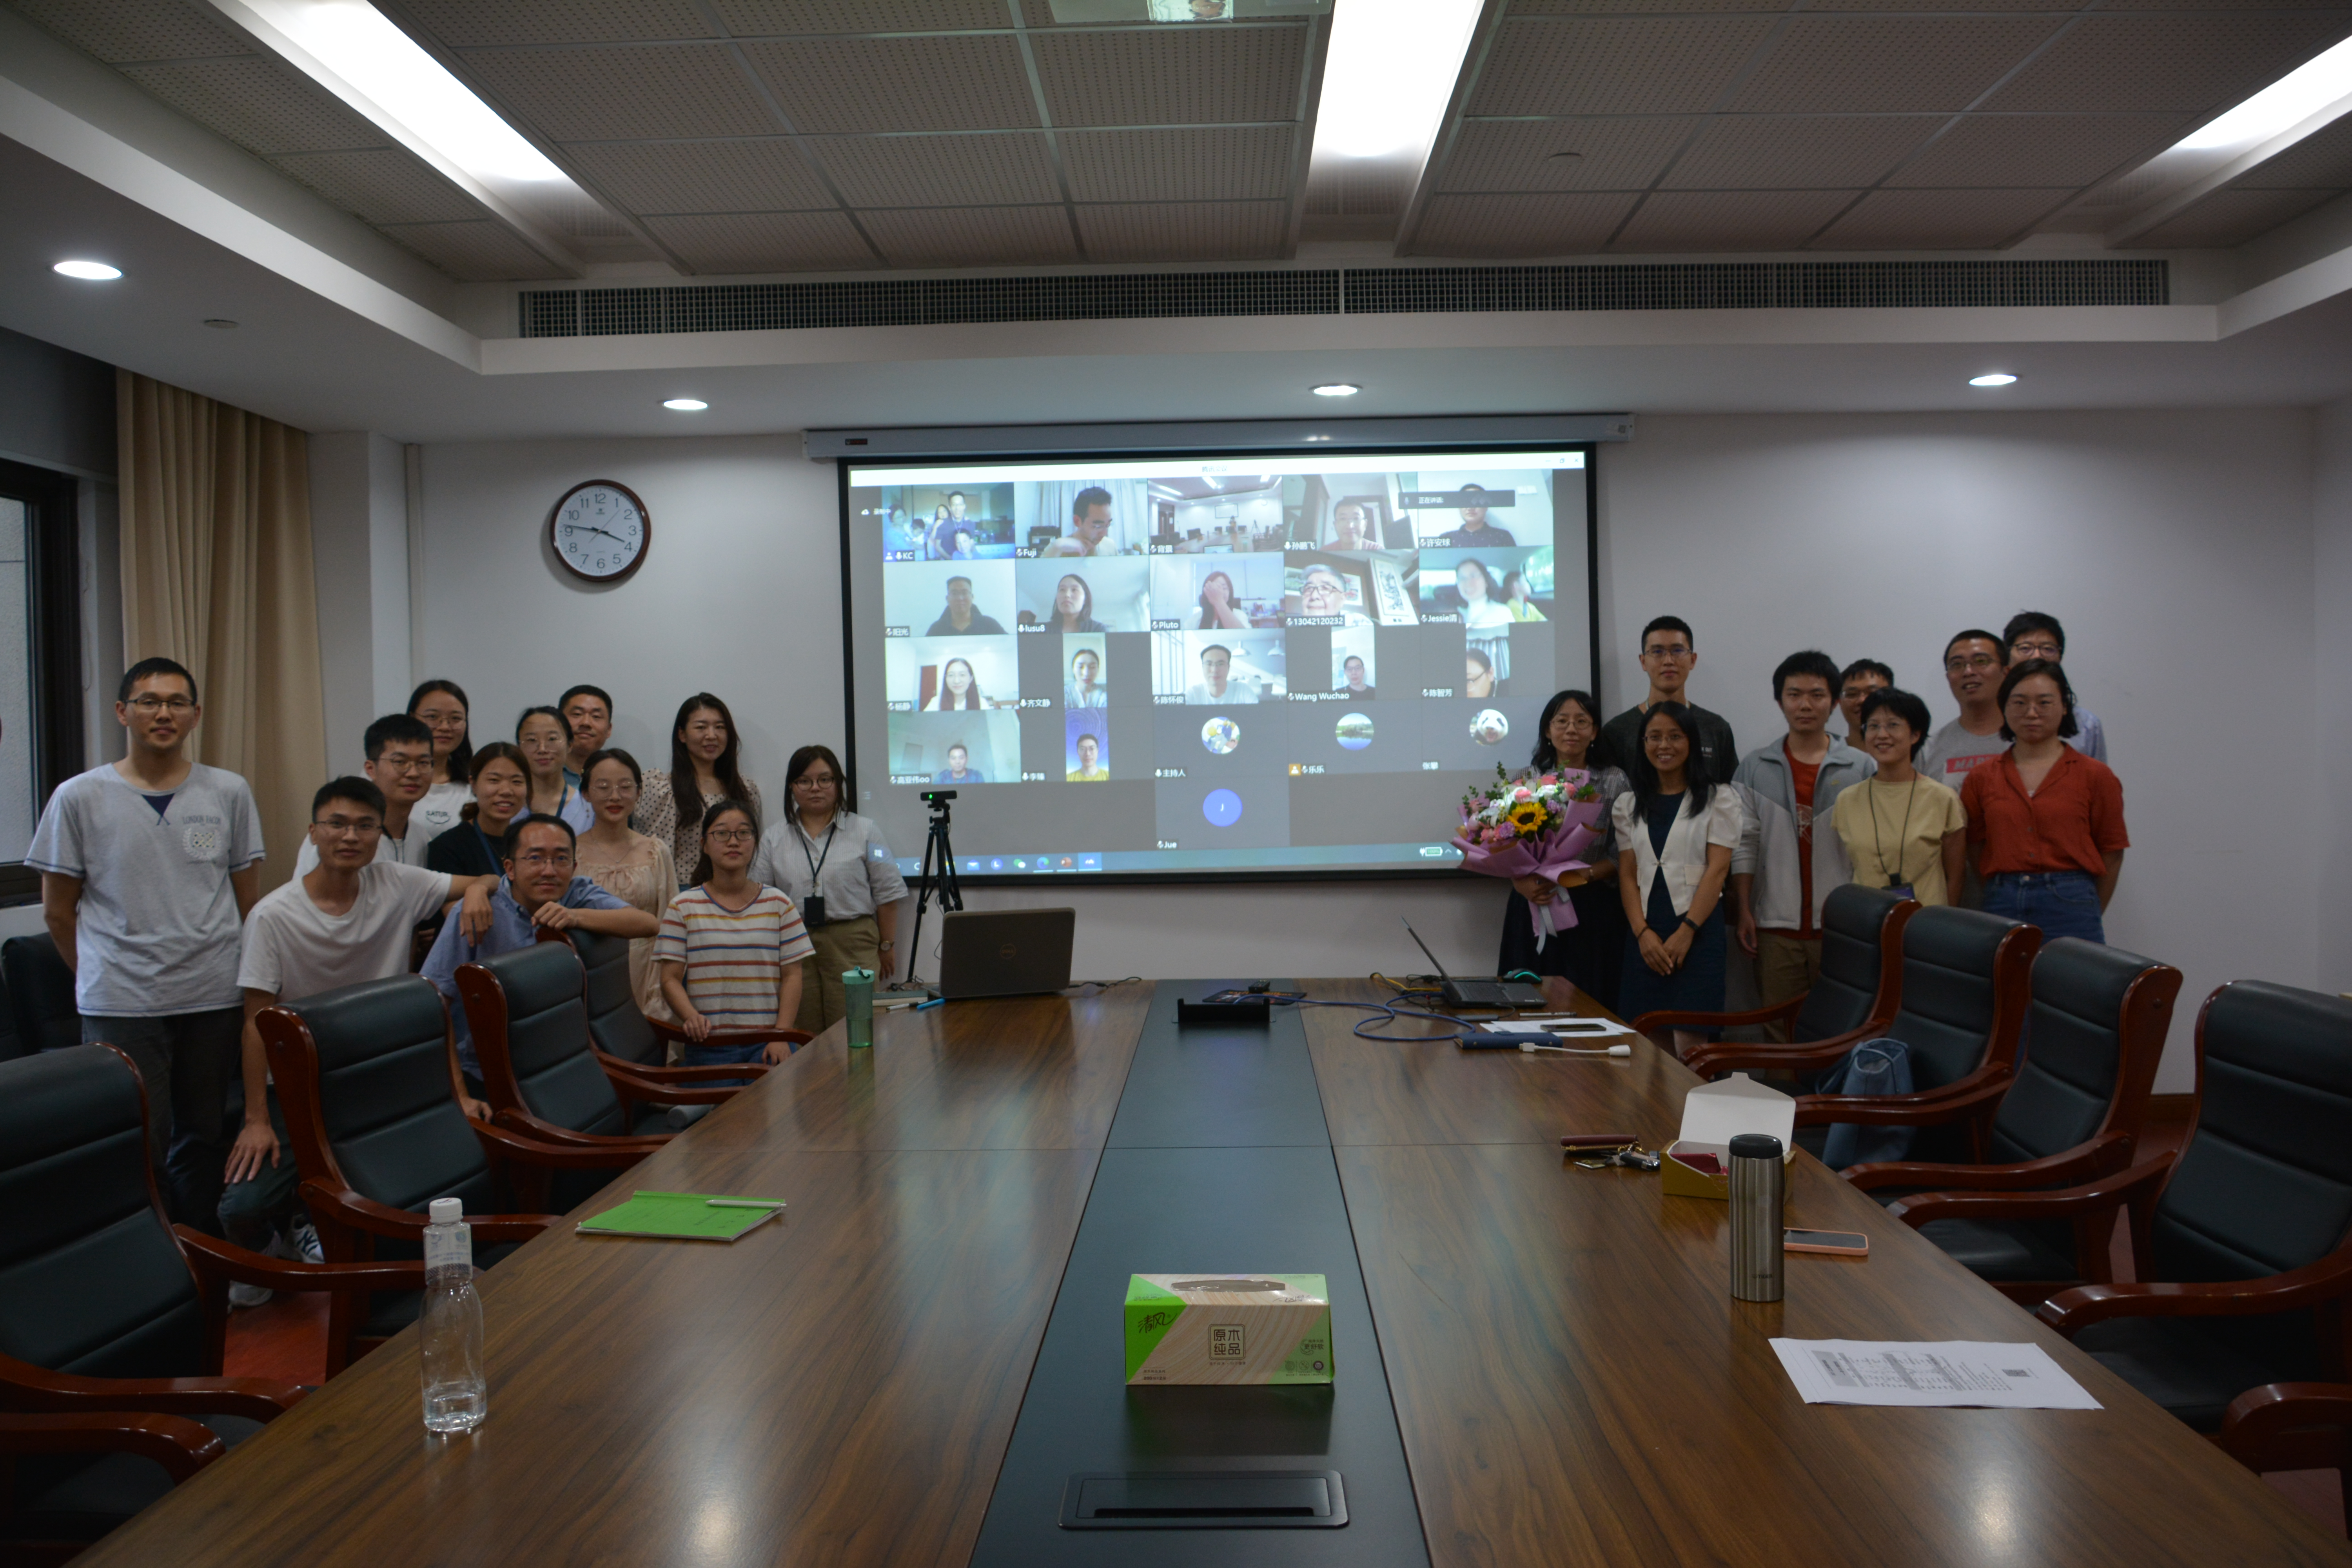 2021.9.4 ‘Global’ meeting of Chen-Jiang’s Group